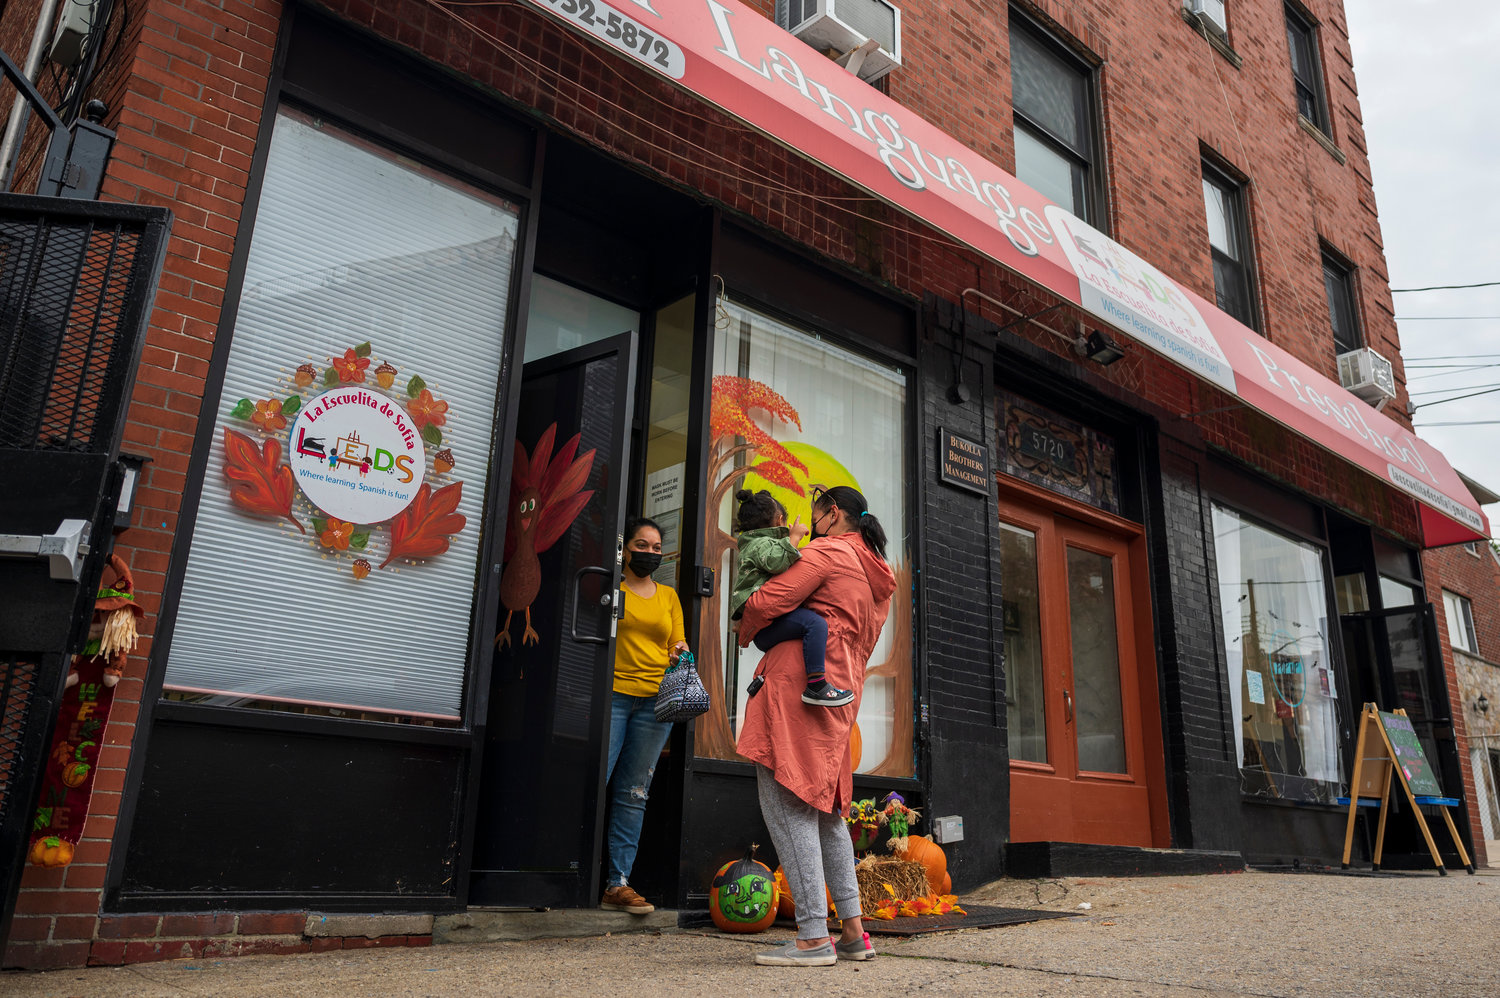 Julissa Freire, owner of La Escuelita de Sofia near Mosholu and Spencer avenues, is concerned the placement of a men’s homeless shelter in her North Riverdale neighborhood could convince parents to stop bringing their children to her preschool.